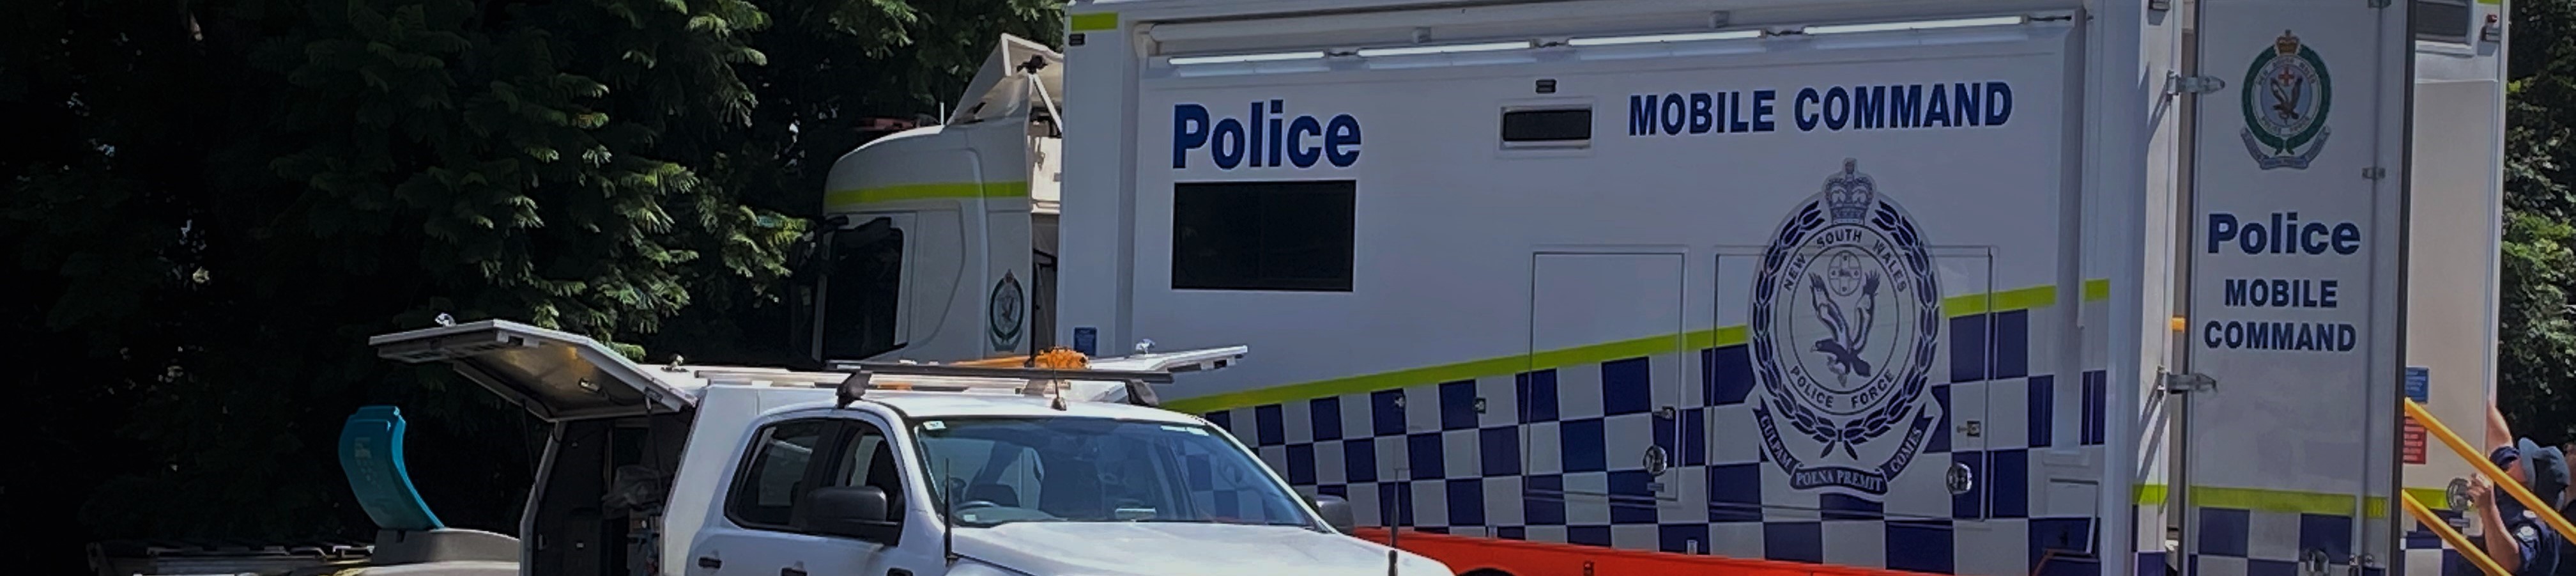 Police mobile command banner